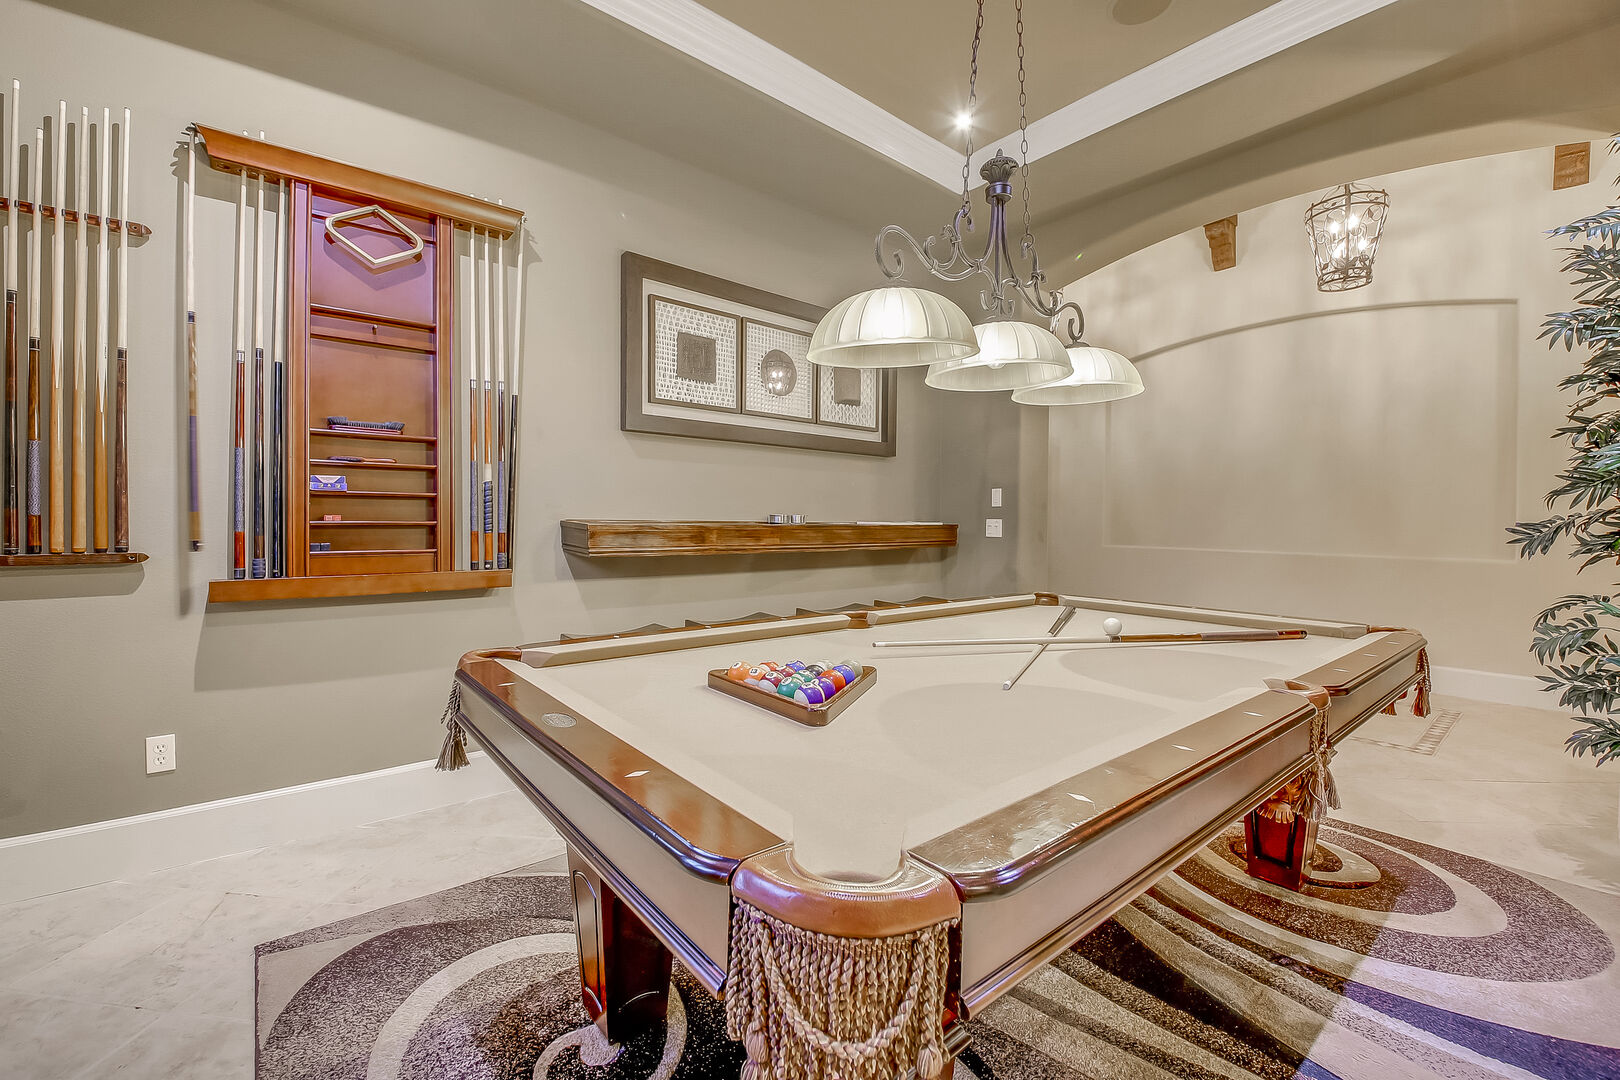 The pool table room just behind the kitchen features many pool cues to ensure you can all get involved in friendly fun!